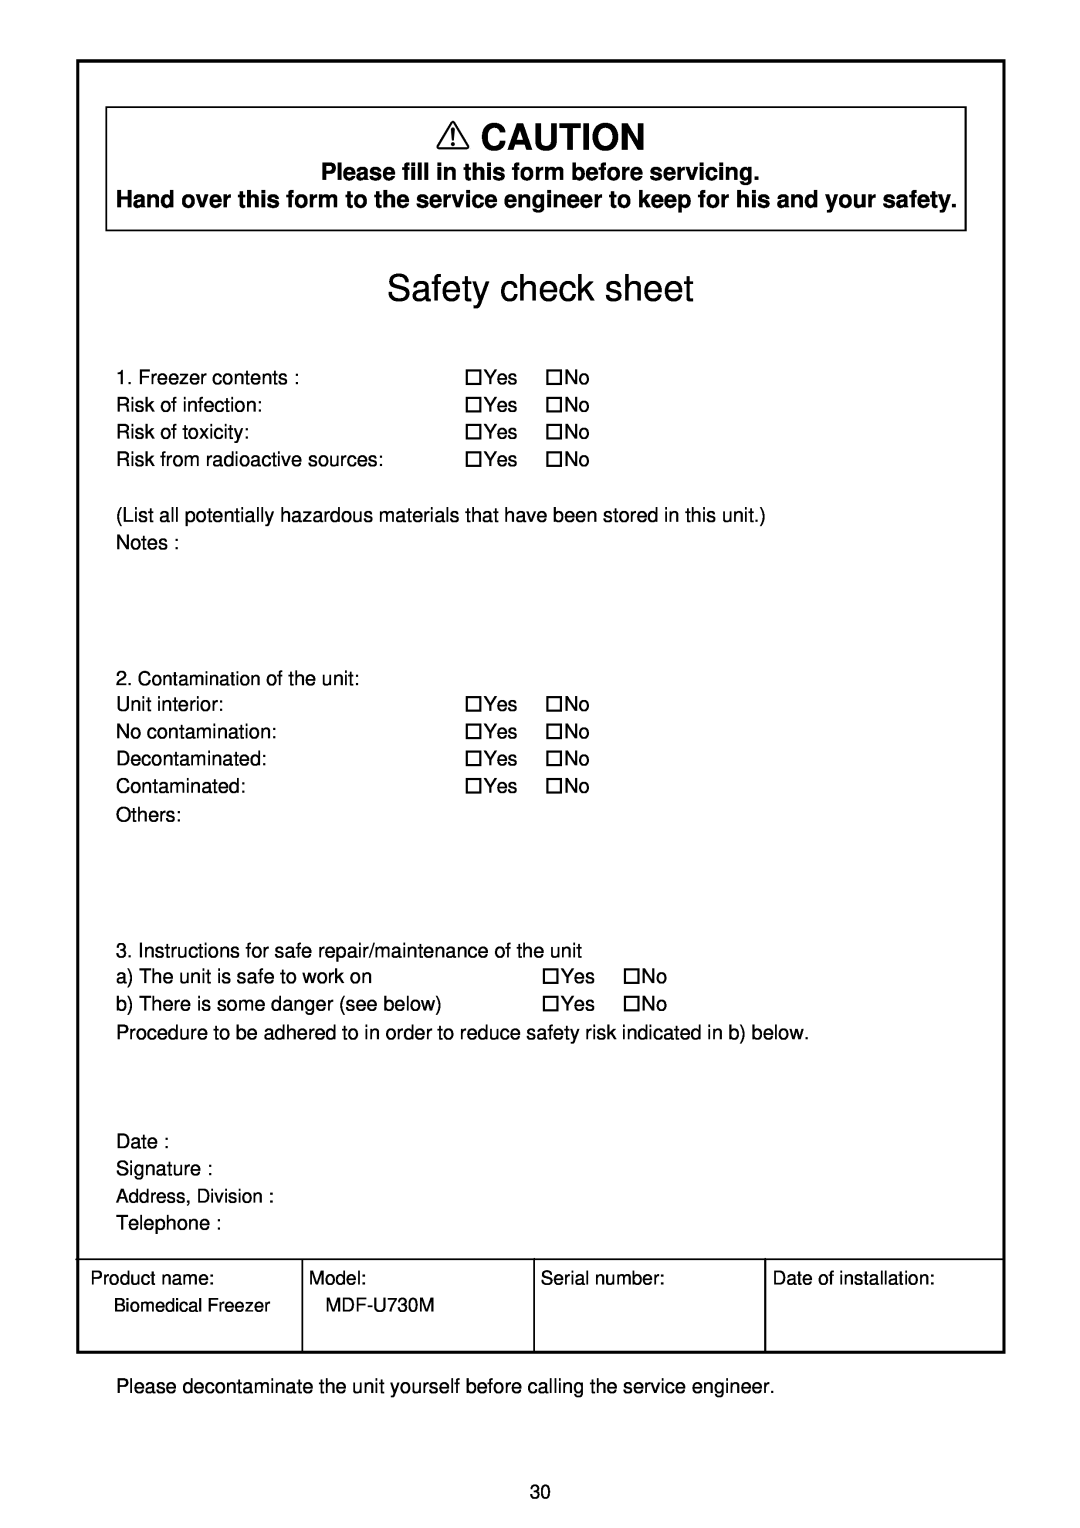 Sanyo MDF-U730M instruction manual Safety check sheet, Please fill in this form before servicing 